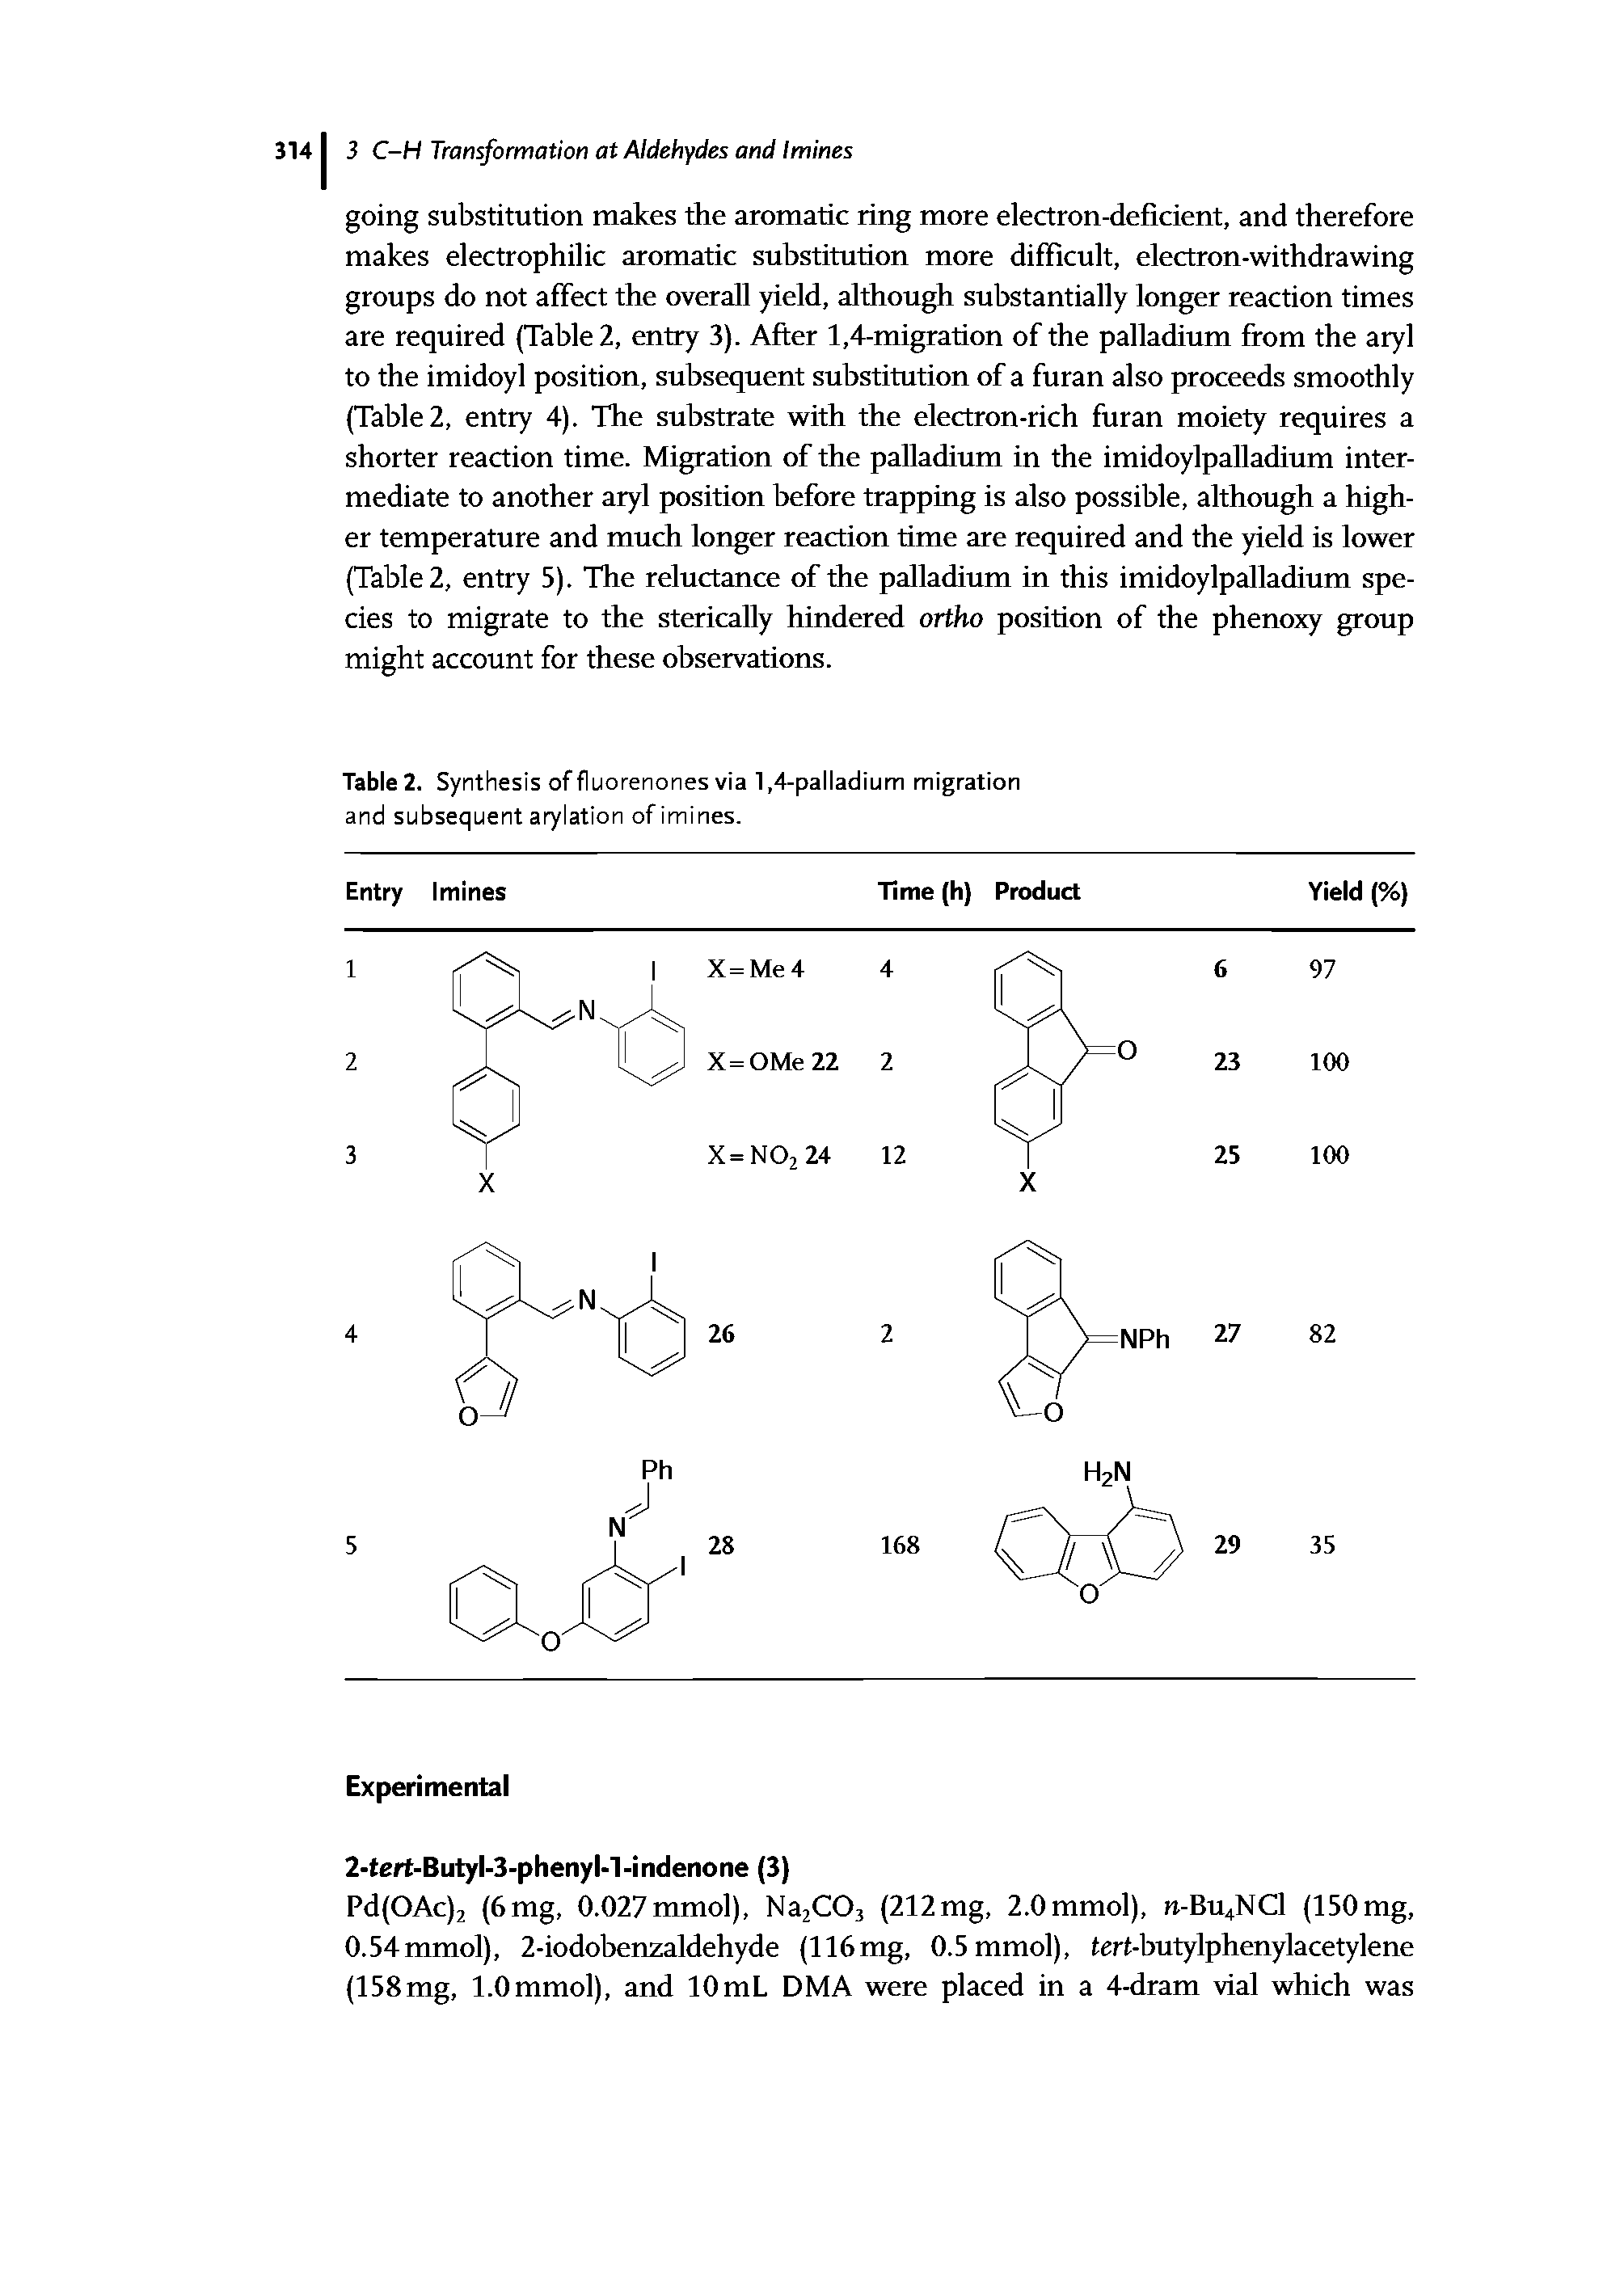 Table 2. Synthesis of fluorenones via 1,4-palladium migration and subsequent arylation of imines.